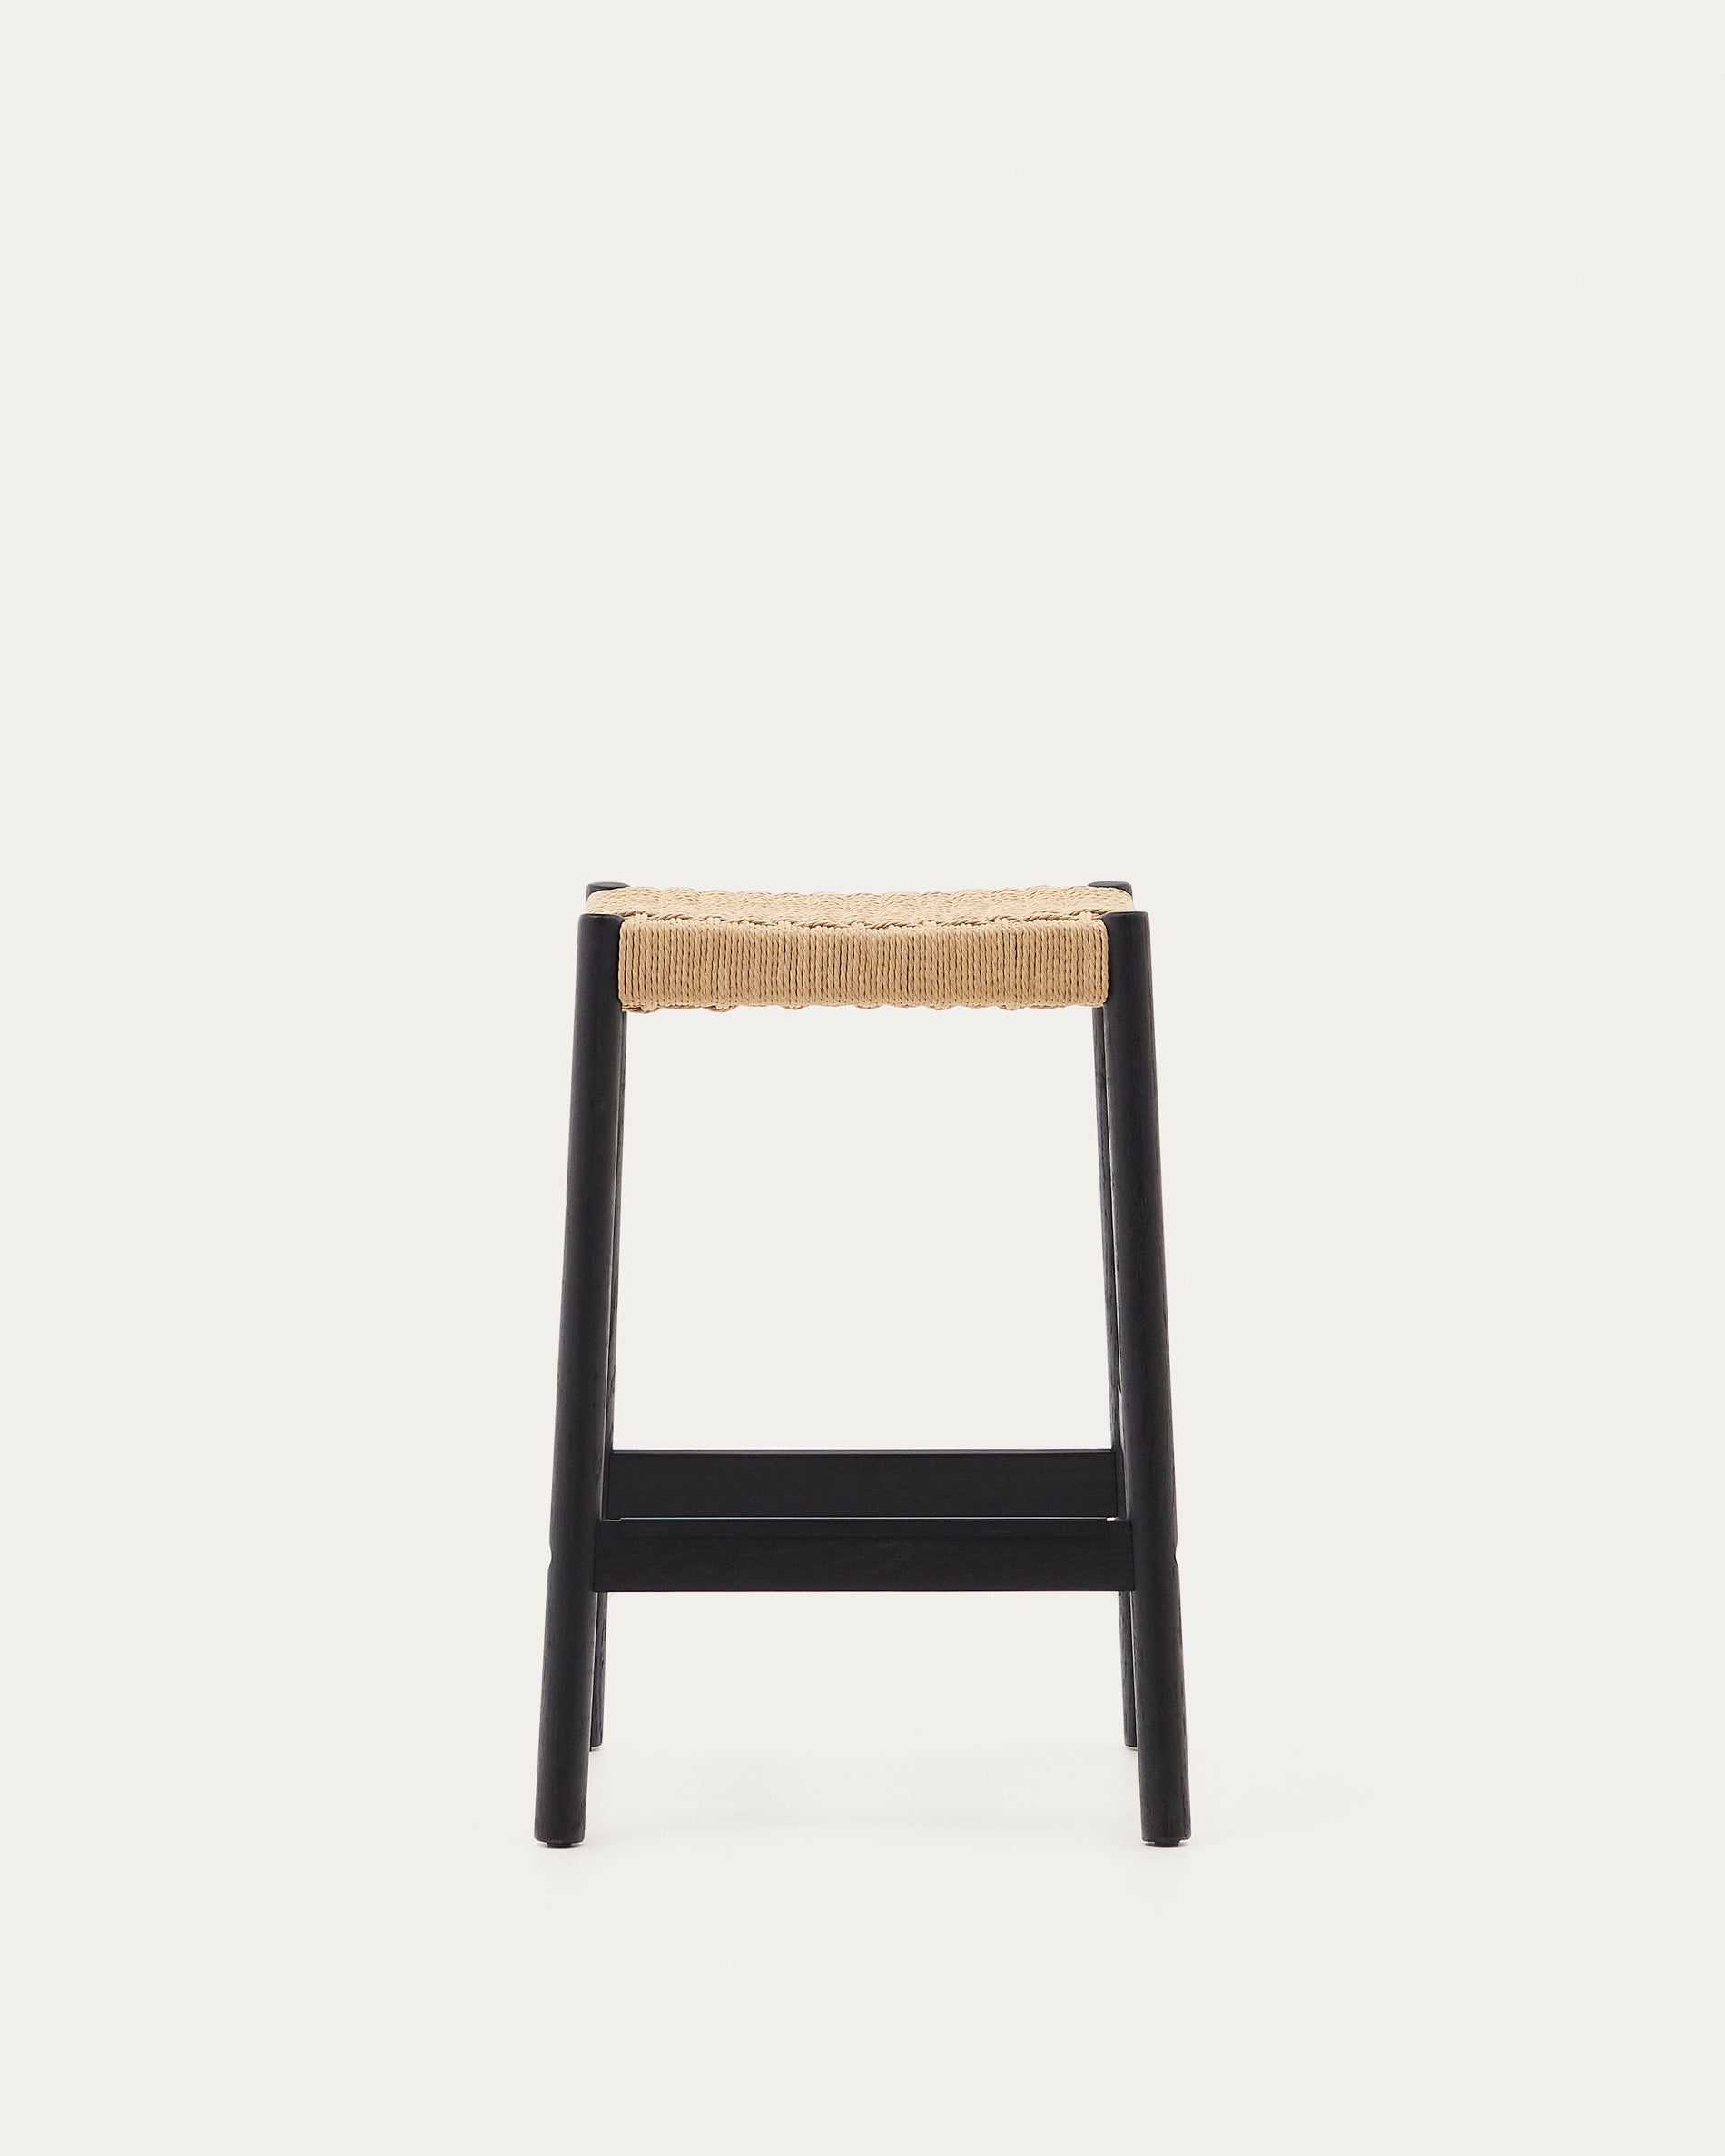 Yalia stool in solid oak with black finish and rope rope, height 65 cm 100% FSC